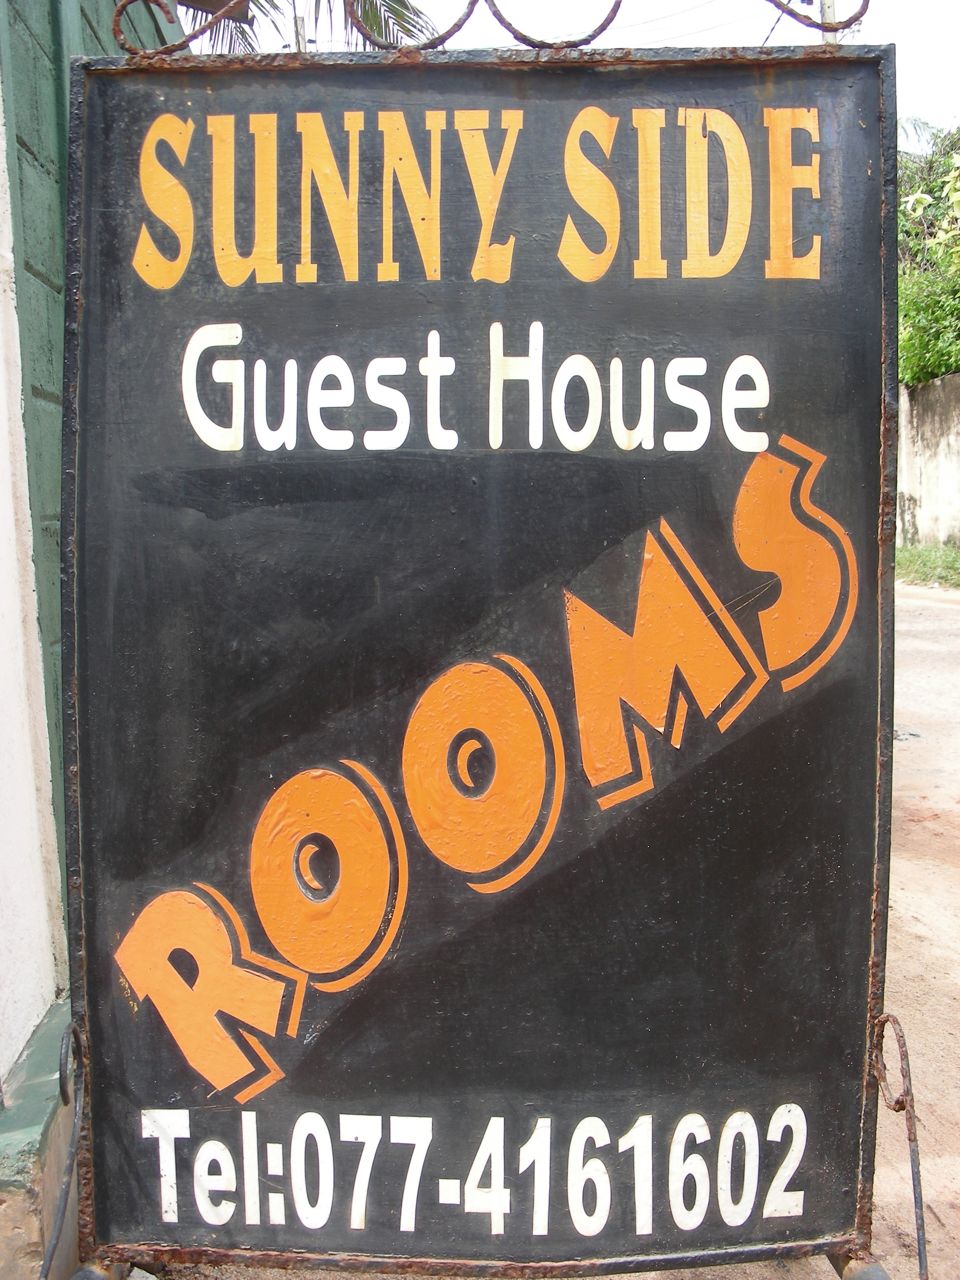 Sunny side guest house